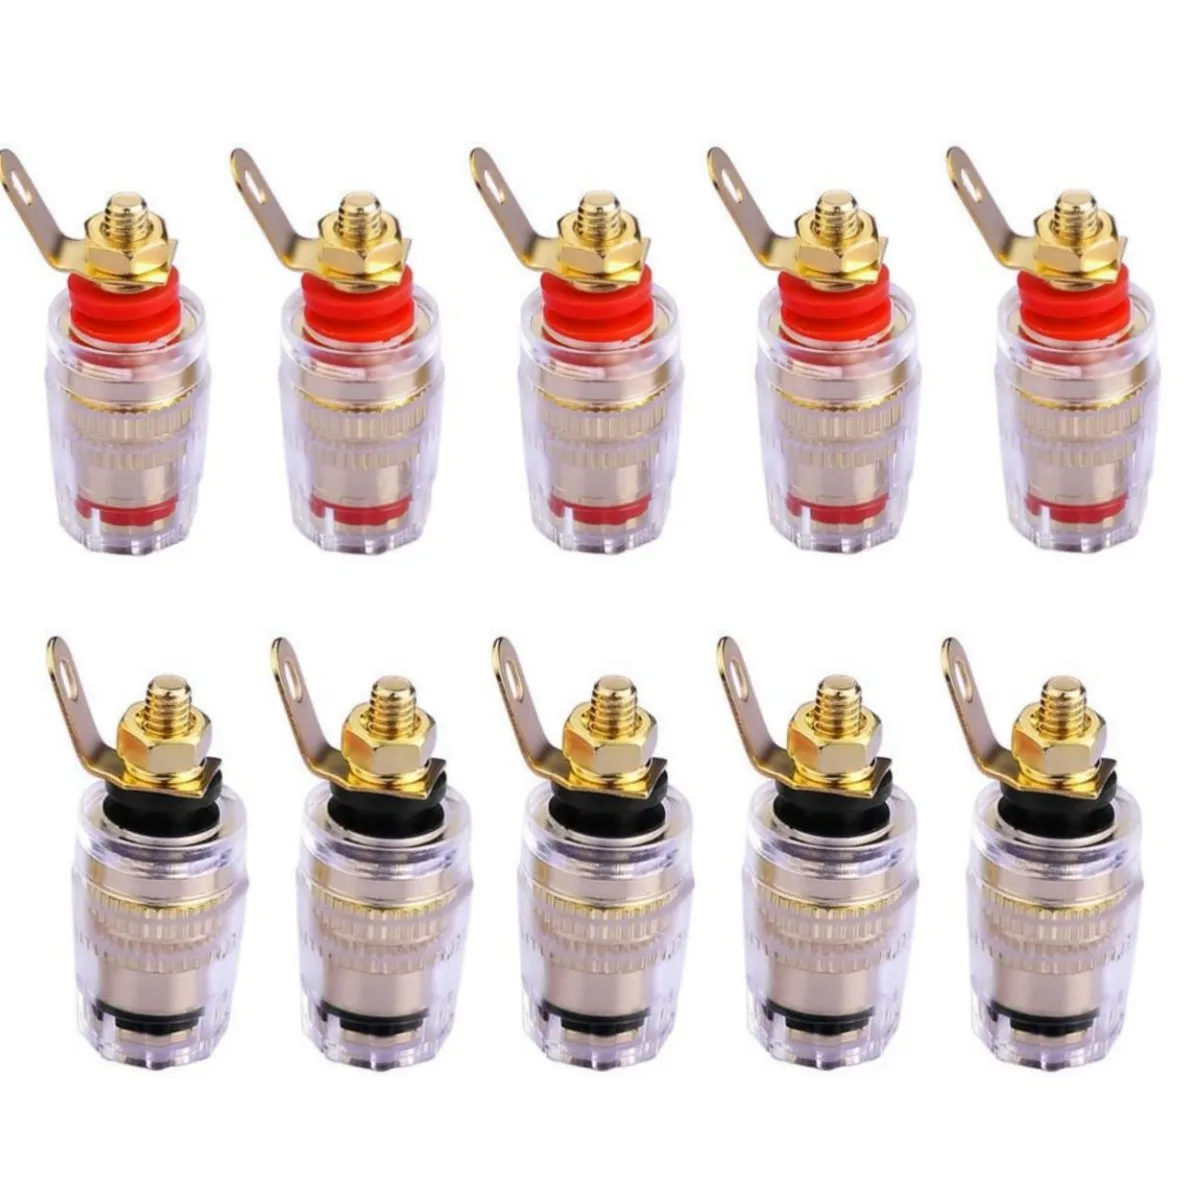 

20-100pcs 4MM Binding Post Connector Audio HIFI Cable Terminals, Binding Post for Speaker Amplifier, Brass With Gold Plated